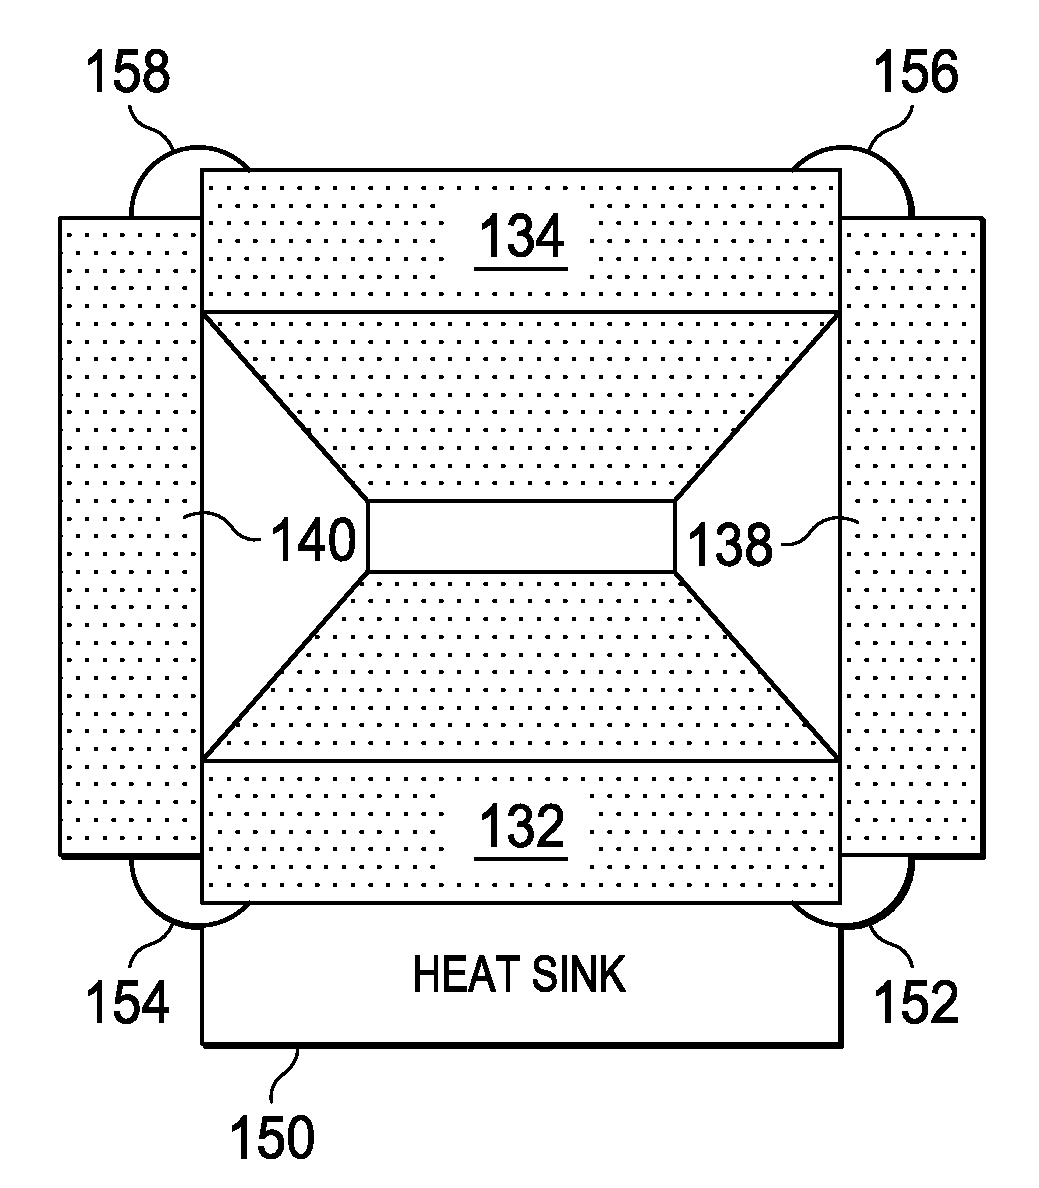 Illumination system with integrated heat dissipation device for use in display systems employing spatial light modulators